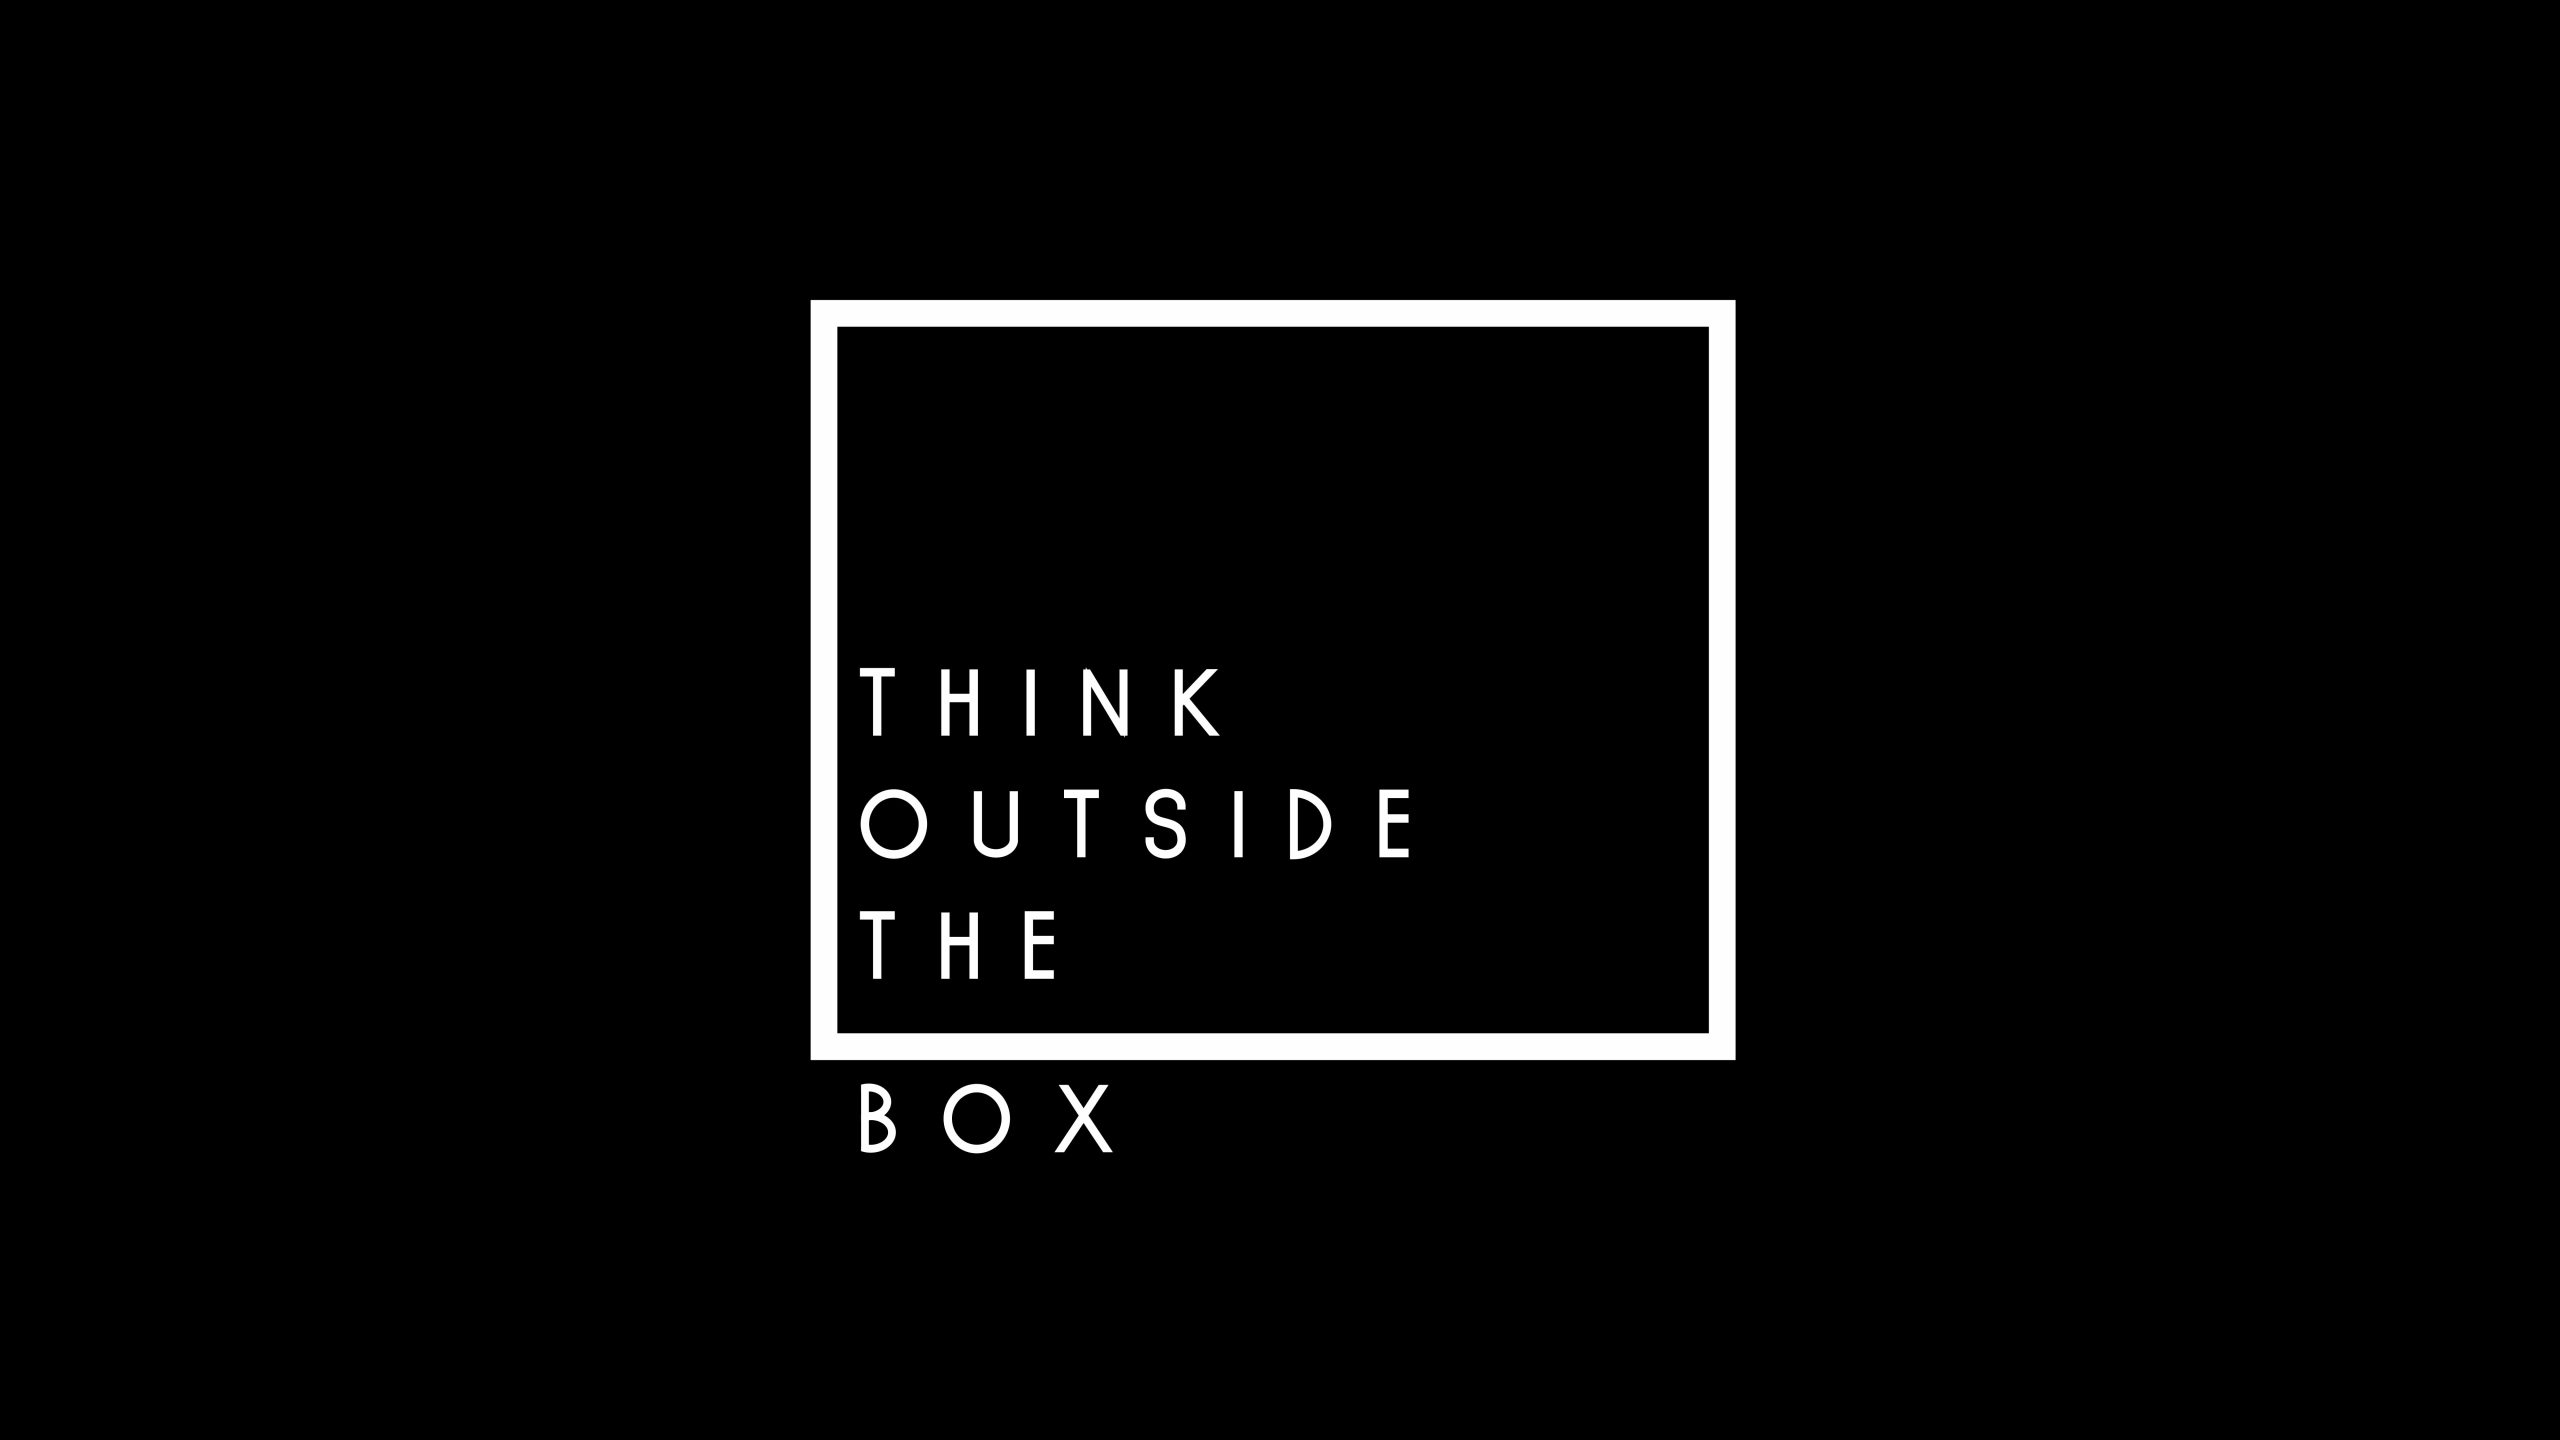 Think Outside the Box wallpaper, 4K, Popular quotes, 8K, Black